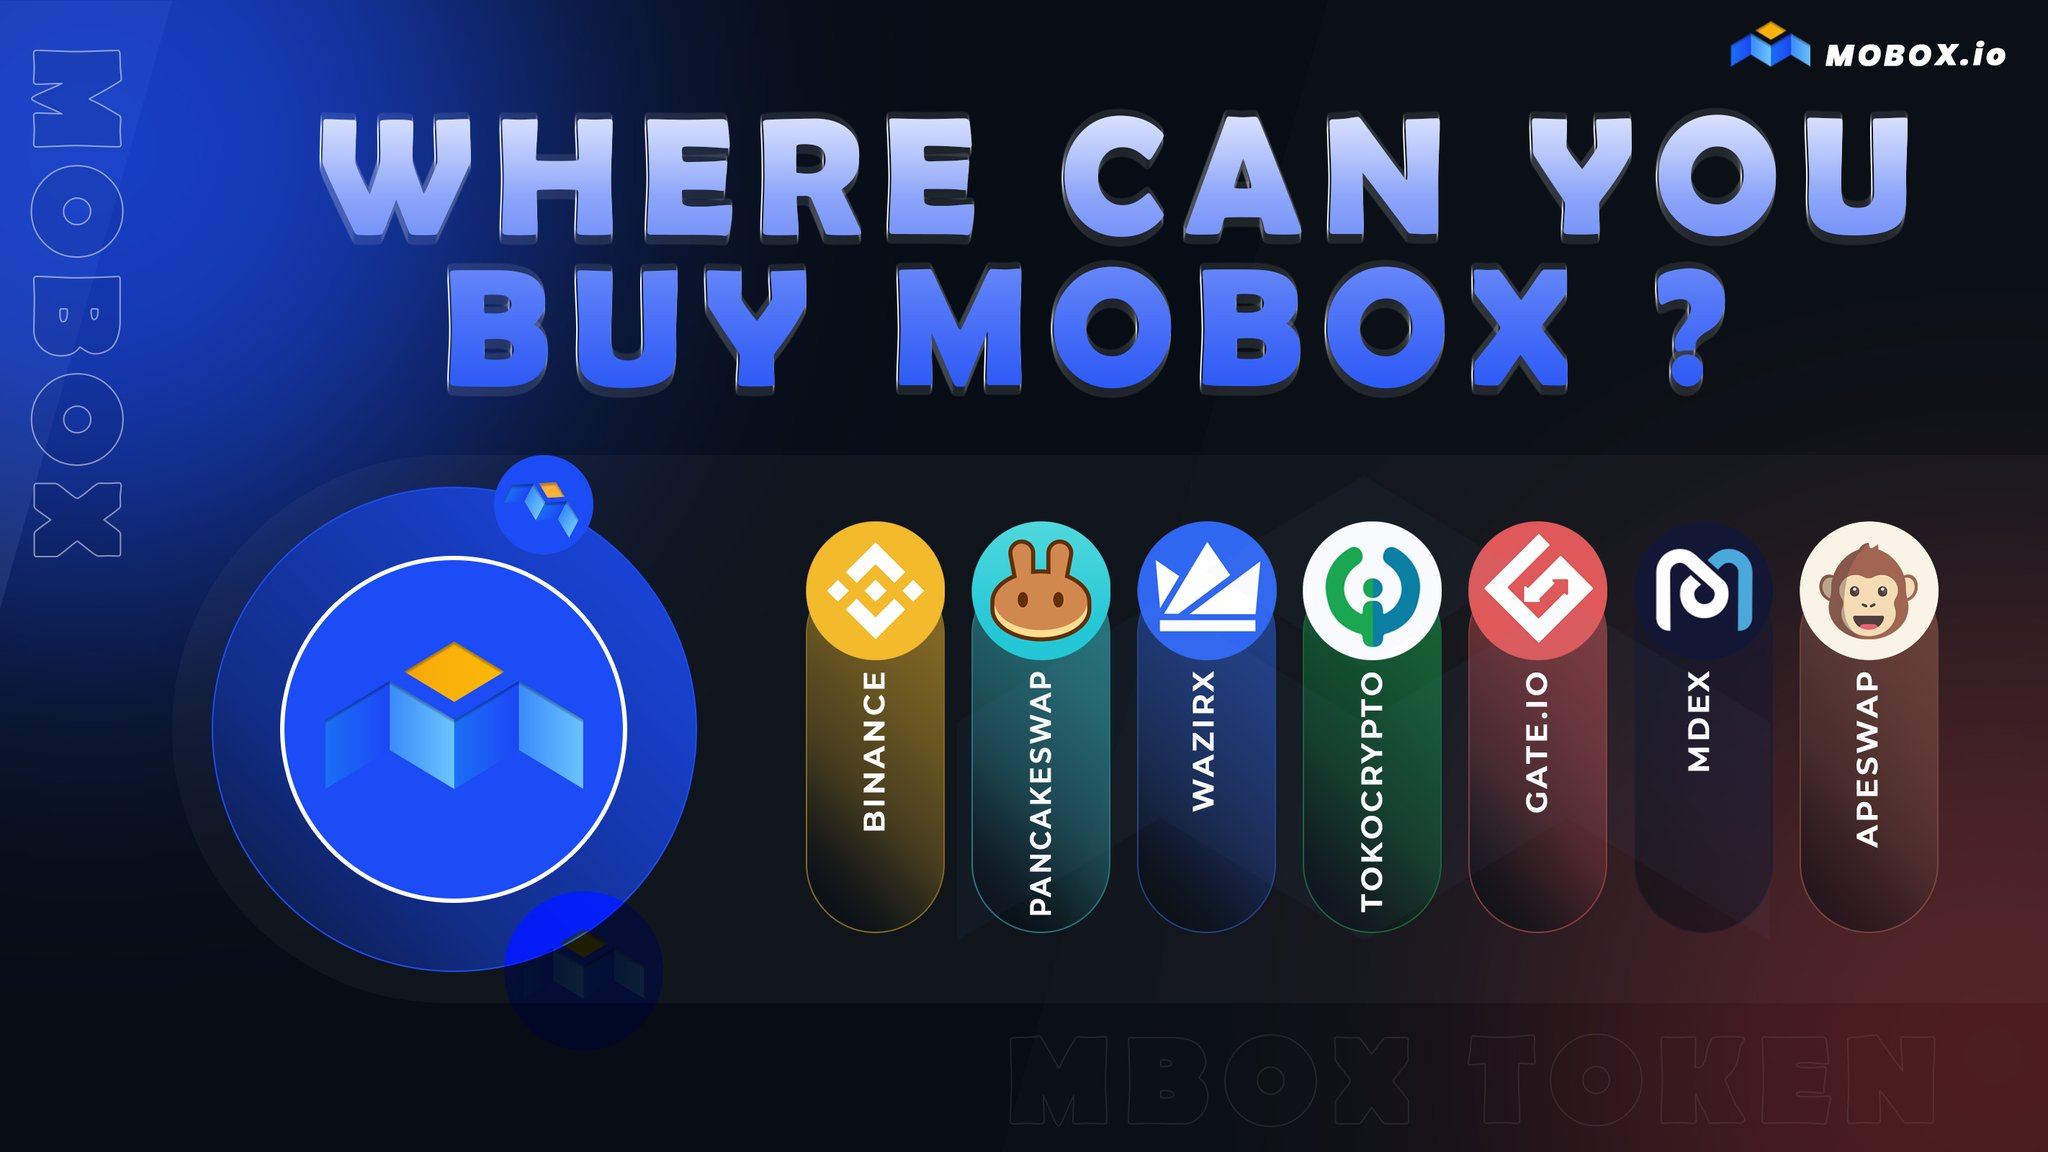 👋 Hey MOBOXers   Want to stock up on more #MBOX ?  Visit our friends below👇& get your hands on  some MOMO-Mazing  #MBOX! 🙌   ⬇️⬇️⬇️  @binance  @PancakeSwap  @WazirXIndia  @Tokocrypto  @gate_io  @Mdexswap  @ape_swap [twitter.com] [pbs.twimg.com]